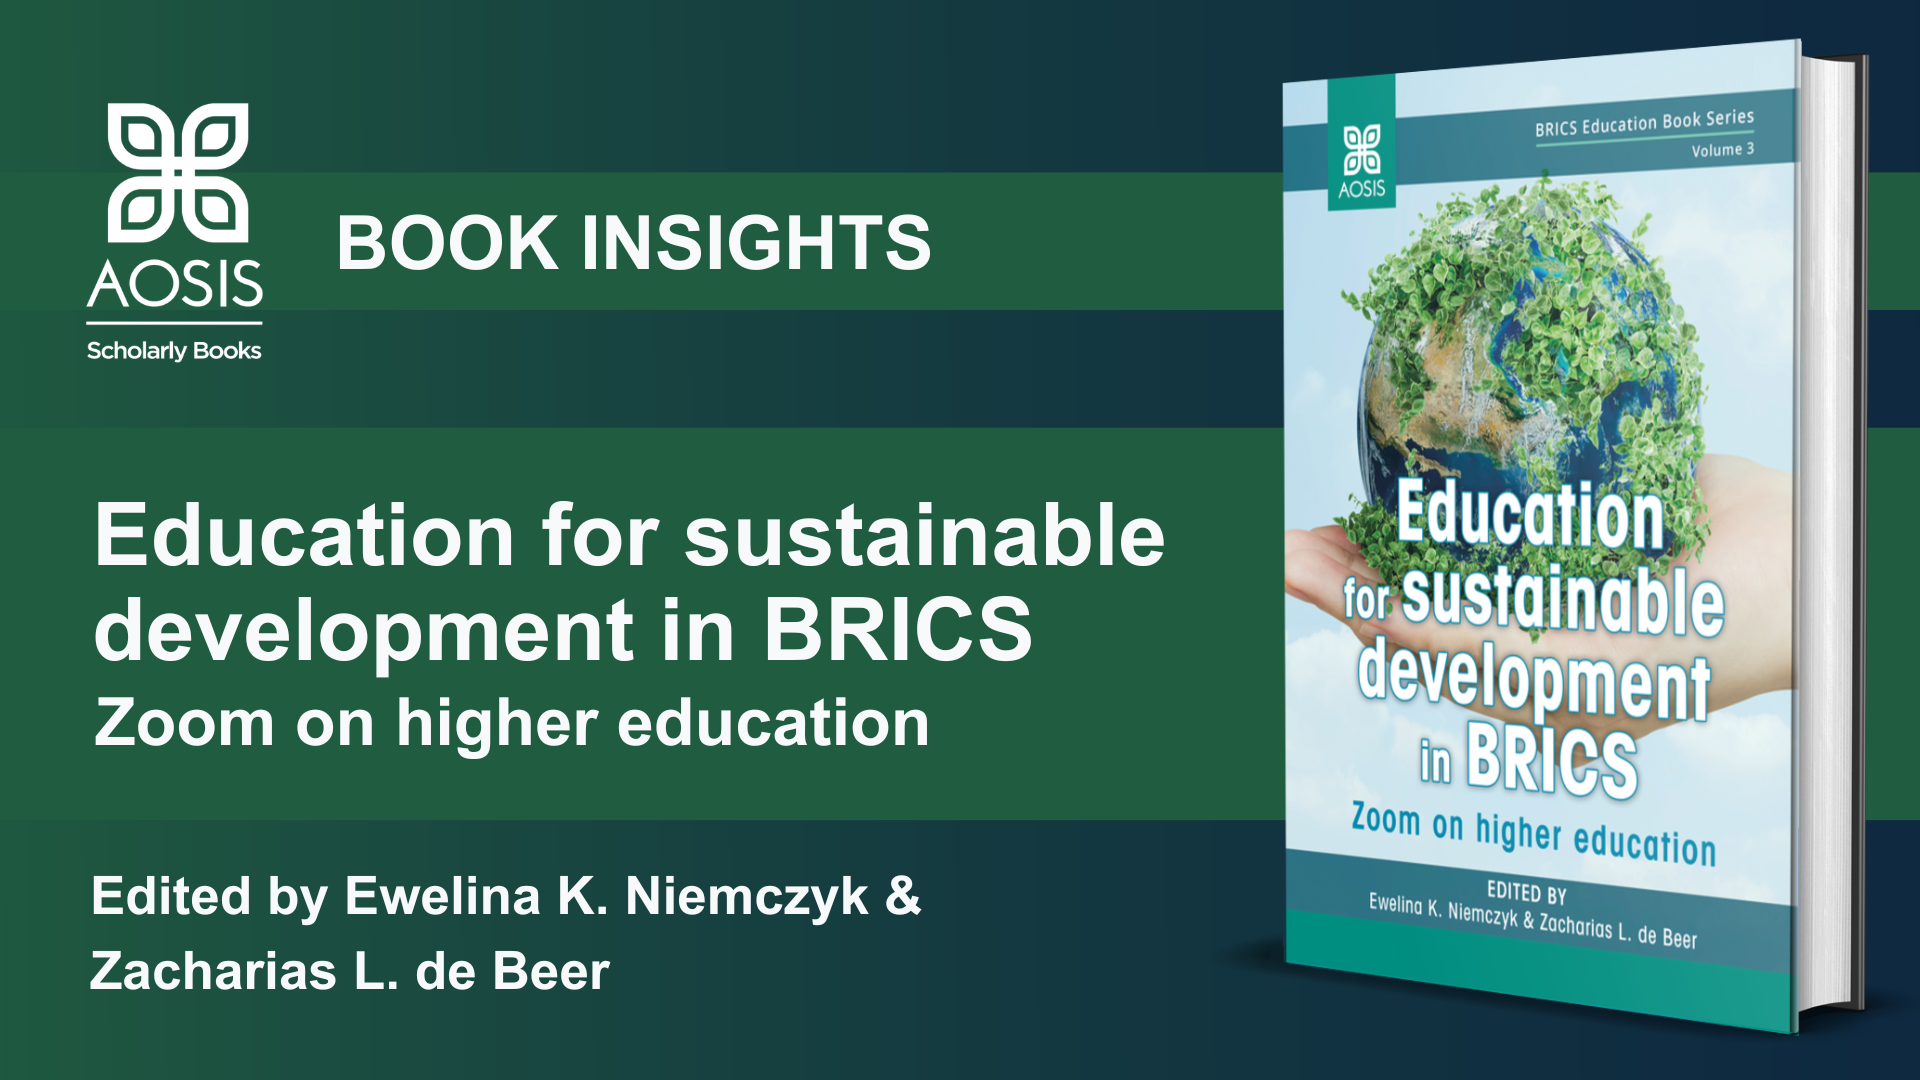 Education for sustainable development in BRICS: Zoom on higher education